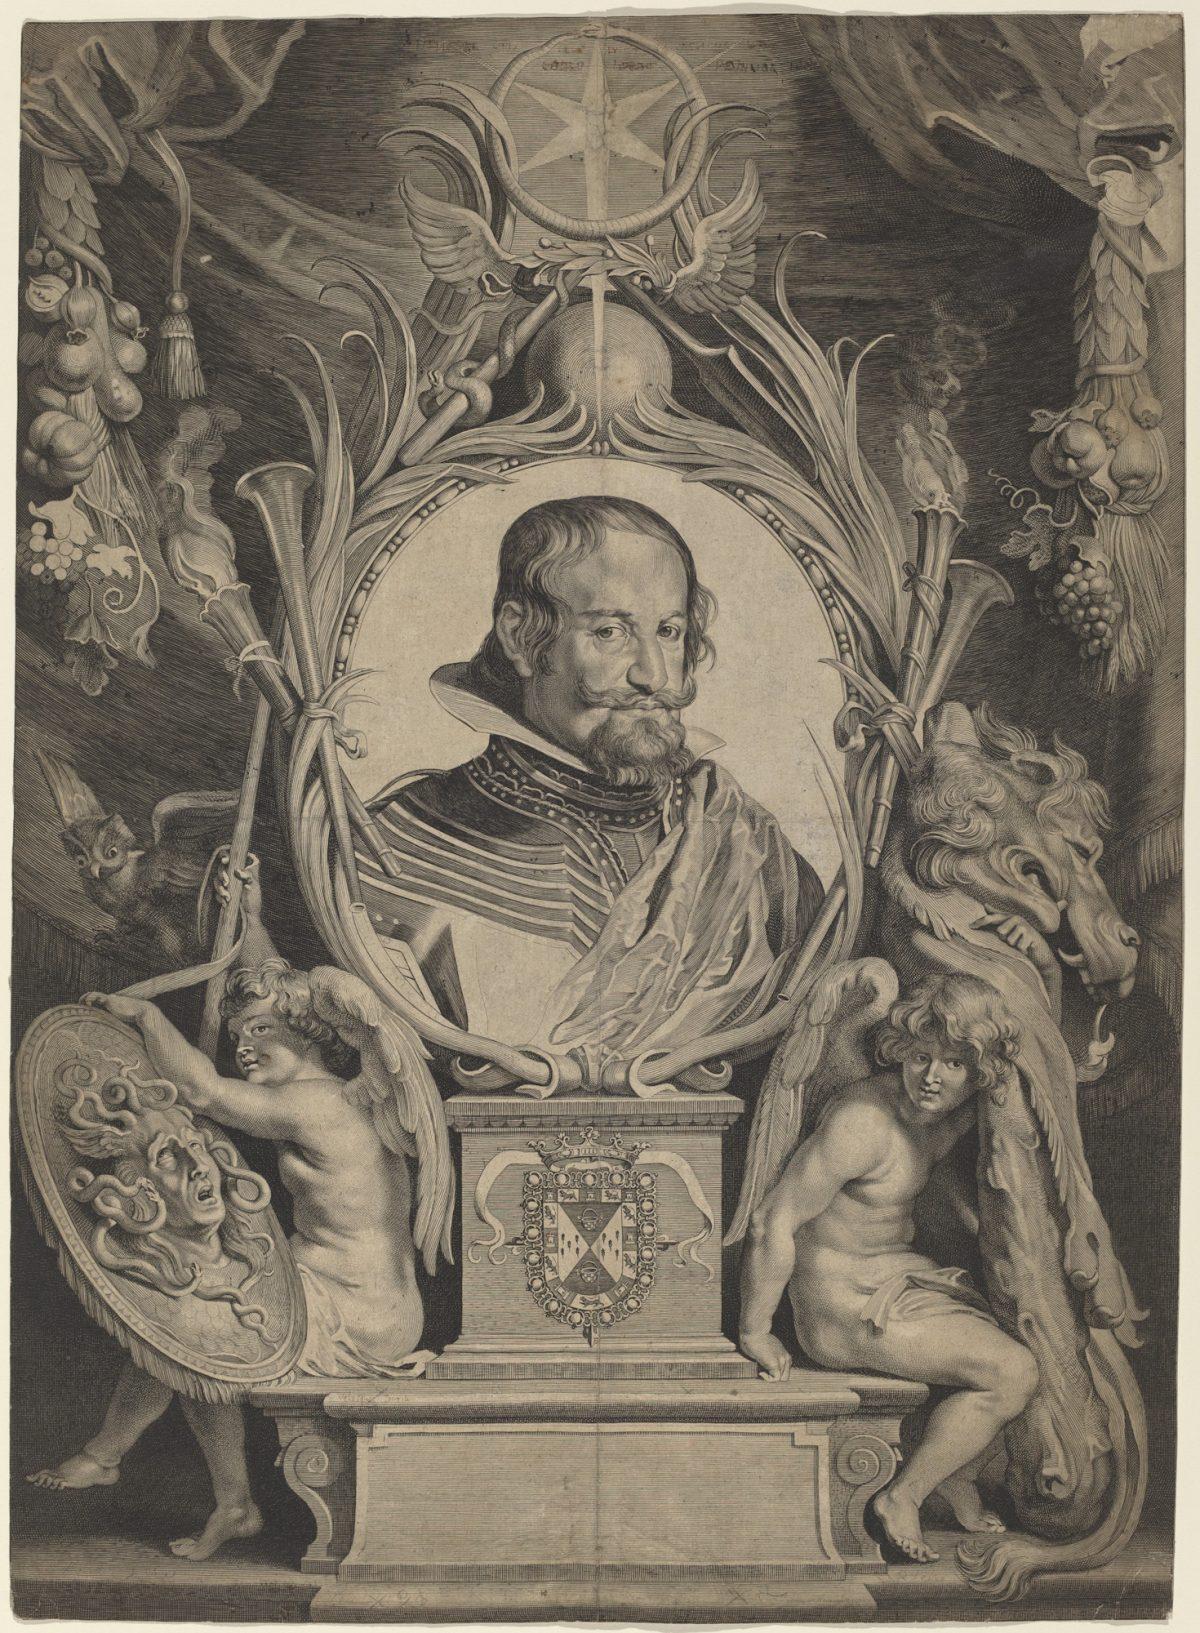 “Gaspar de Guzmán, Count-Duke of Olivares,” circa 1626, by Paulus Pontius, after Diego Velázquez and Peter Paul Rubens. Engraving on paper, 23 3/4 inches by 17 3/16 inches. National Gallery of Art, Washington, gift of the estate of Leo Steinberg, 2011. (Courtesy National Gallery of Art, Washington)